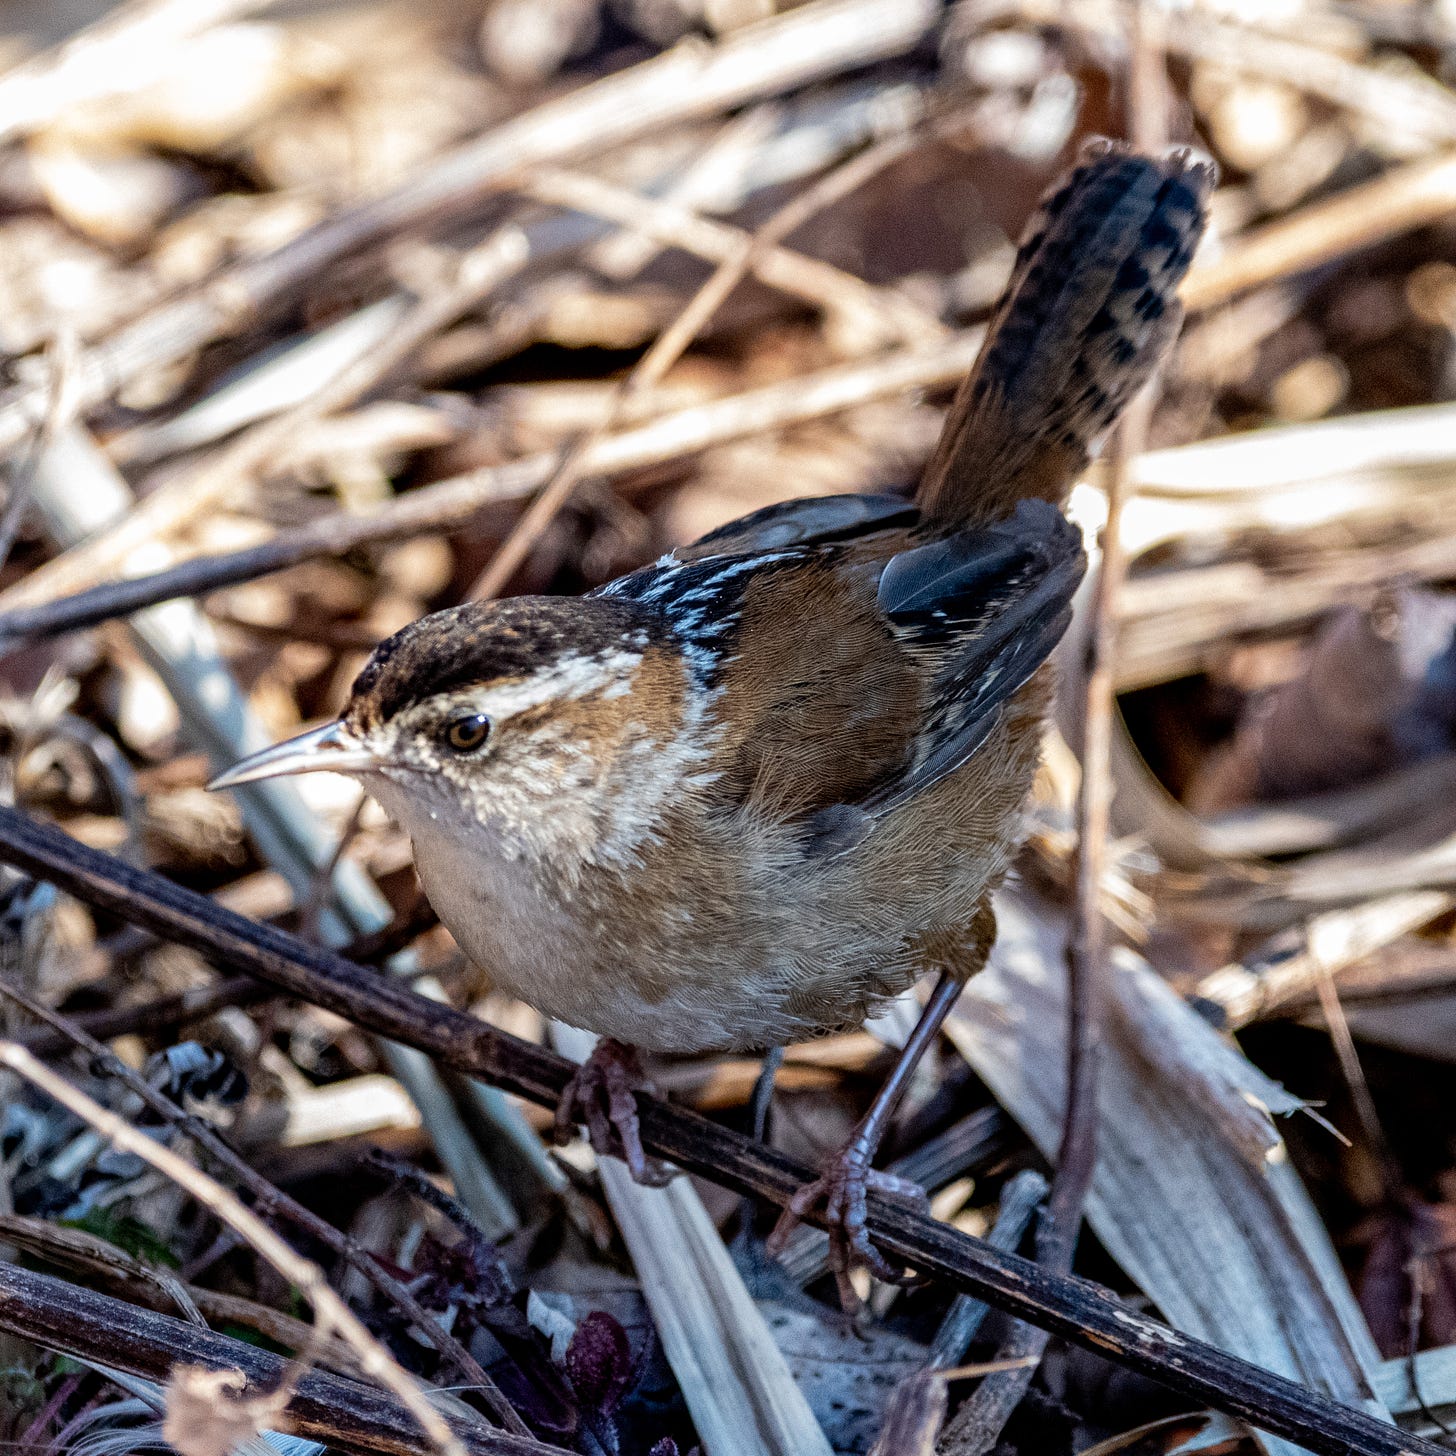 Marsh wren, head in sun and body in shadow, perched on a dried stem, tail up